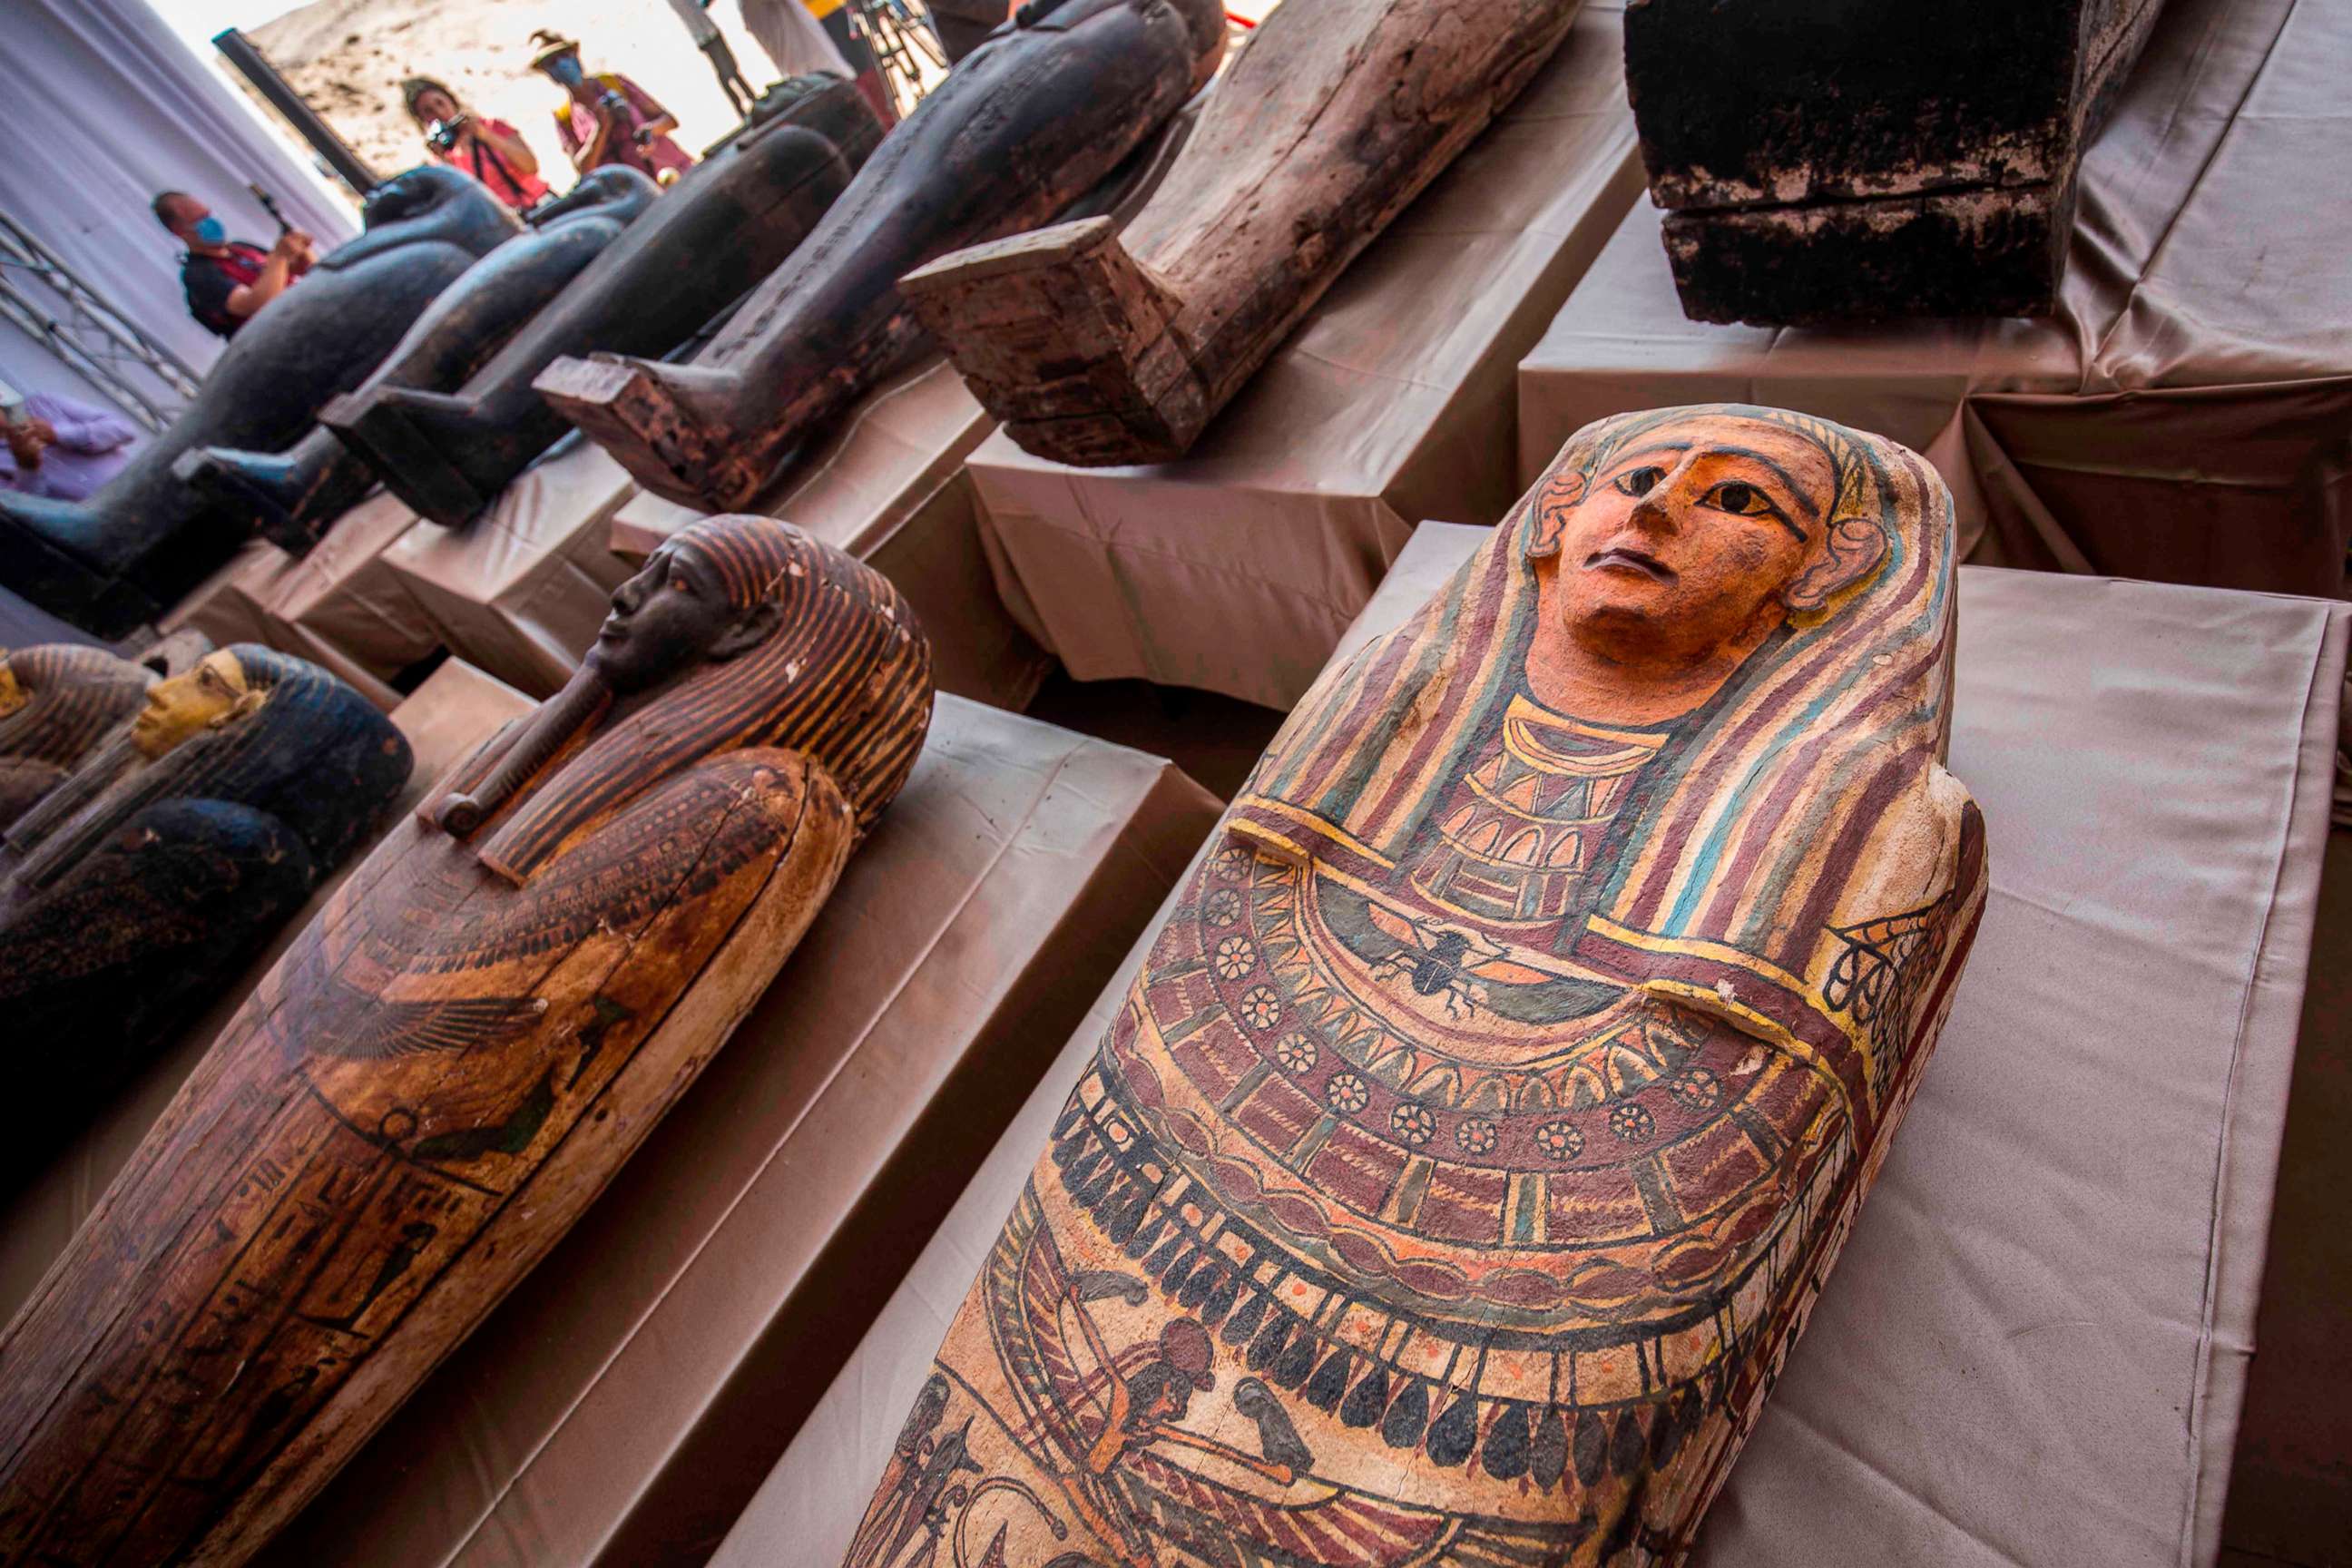 PHOTO: Sarcophagi, excavated by the Egyptian archaeological mission, are displayed during a press conference, Oct. 3, 2020, at the Saqqara necropolis, 30 kms south of the Egyptian capital Cairo.